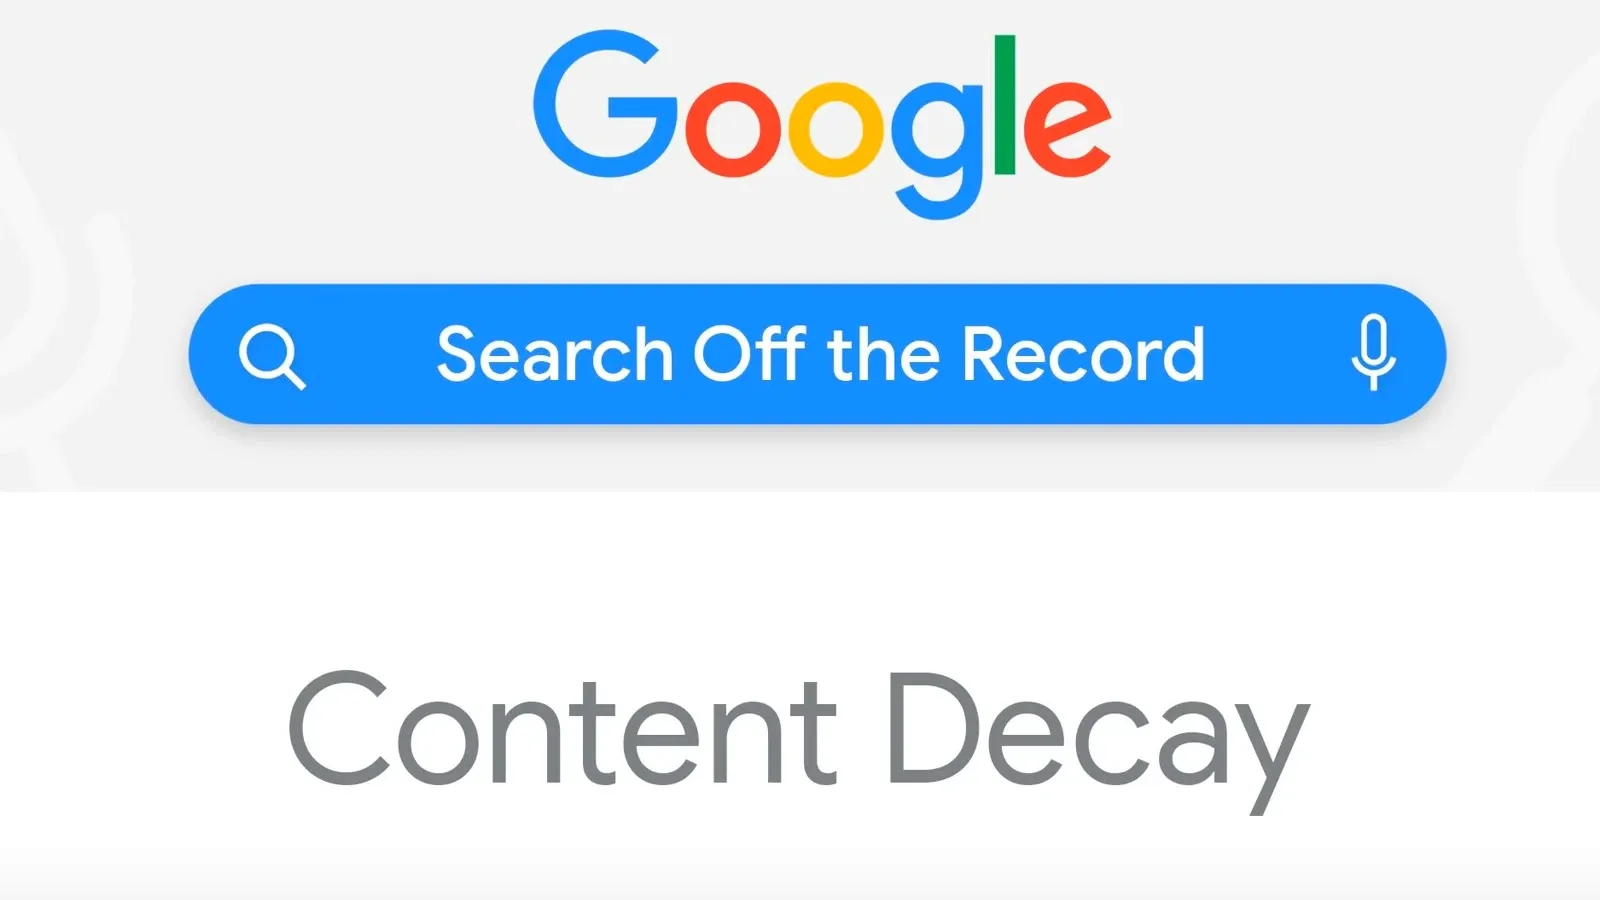 Google Search Central discusses addressing Content Decay